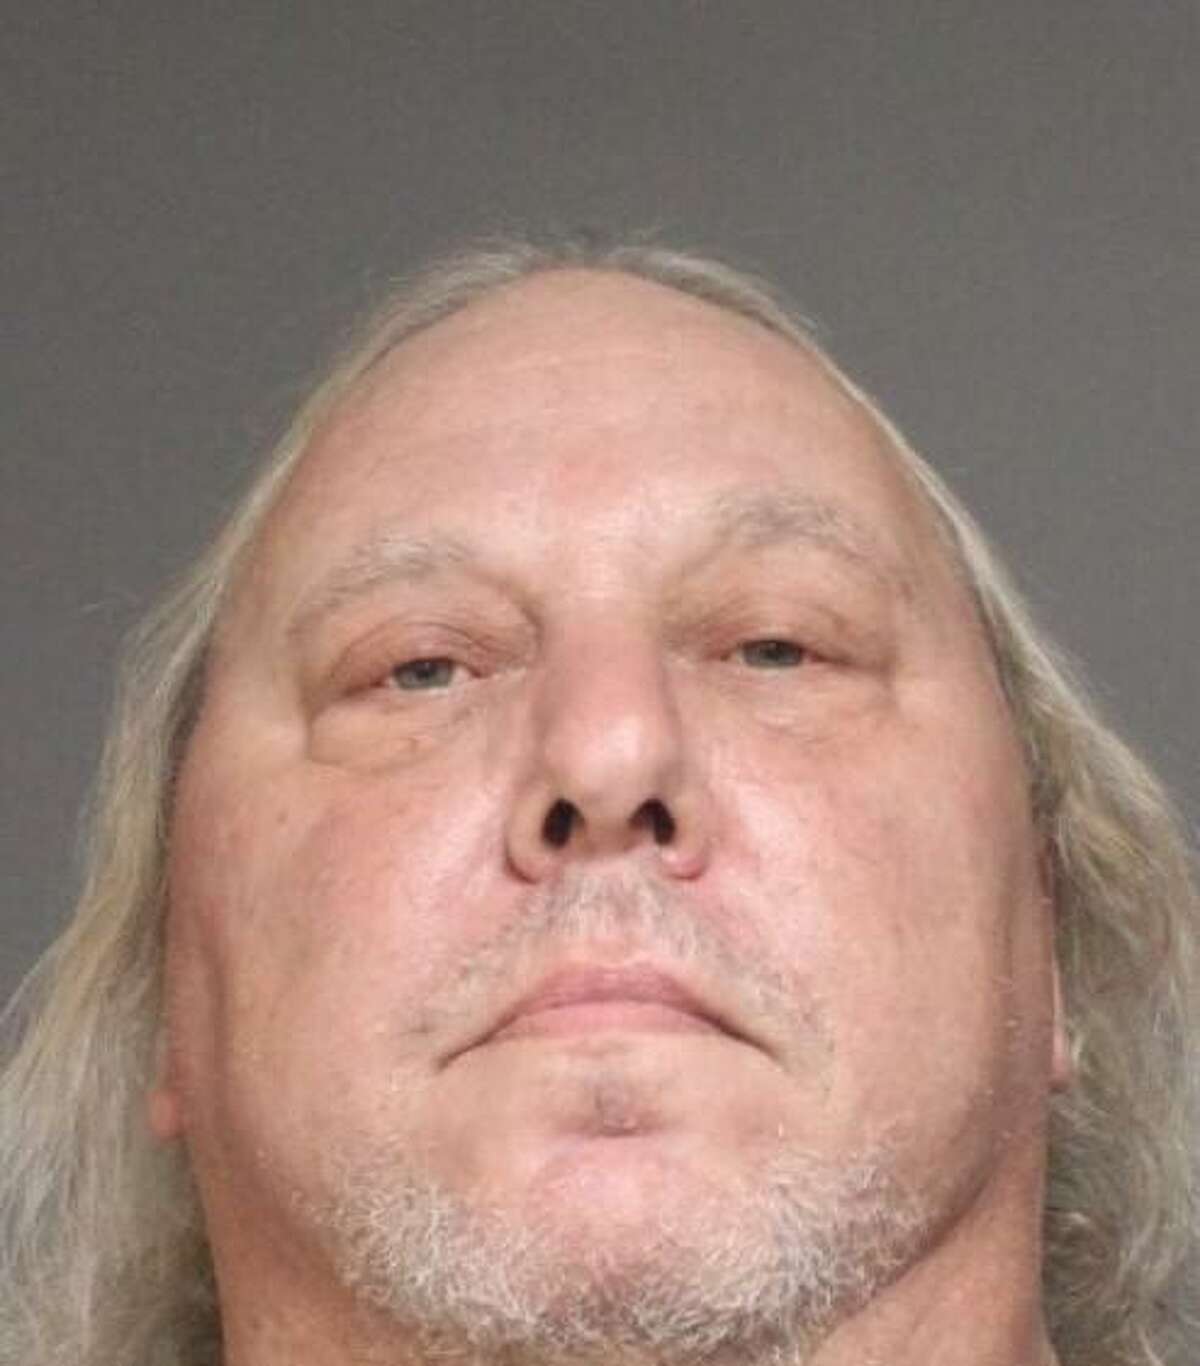 Michael Palmieri, a 60-year-old Fairfield resident, was been arrested and charged with second-degree forgery and conspiracy to commit second degree forgery, according to police.